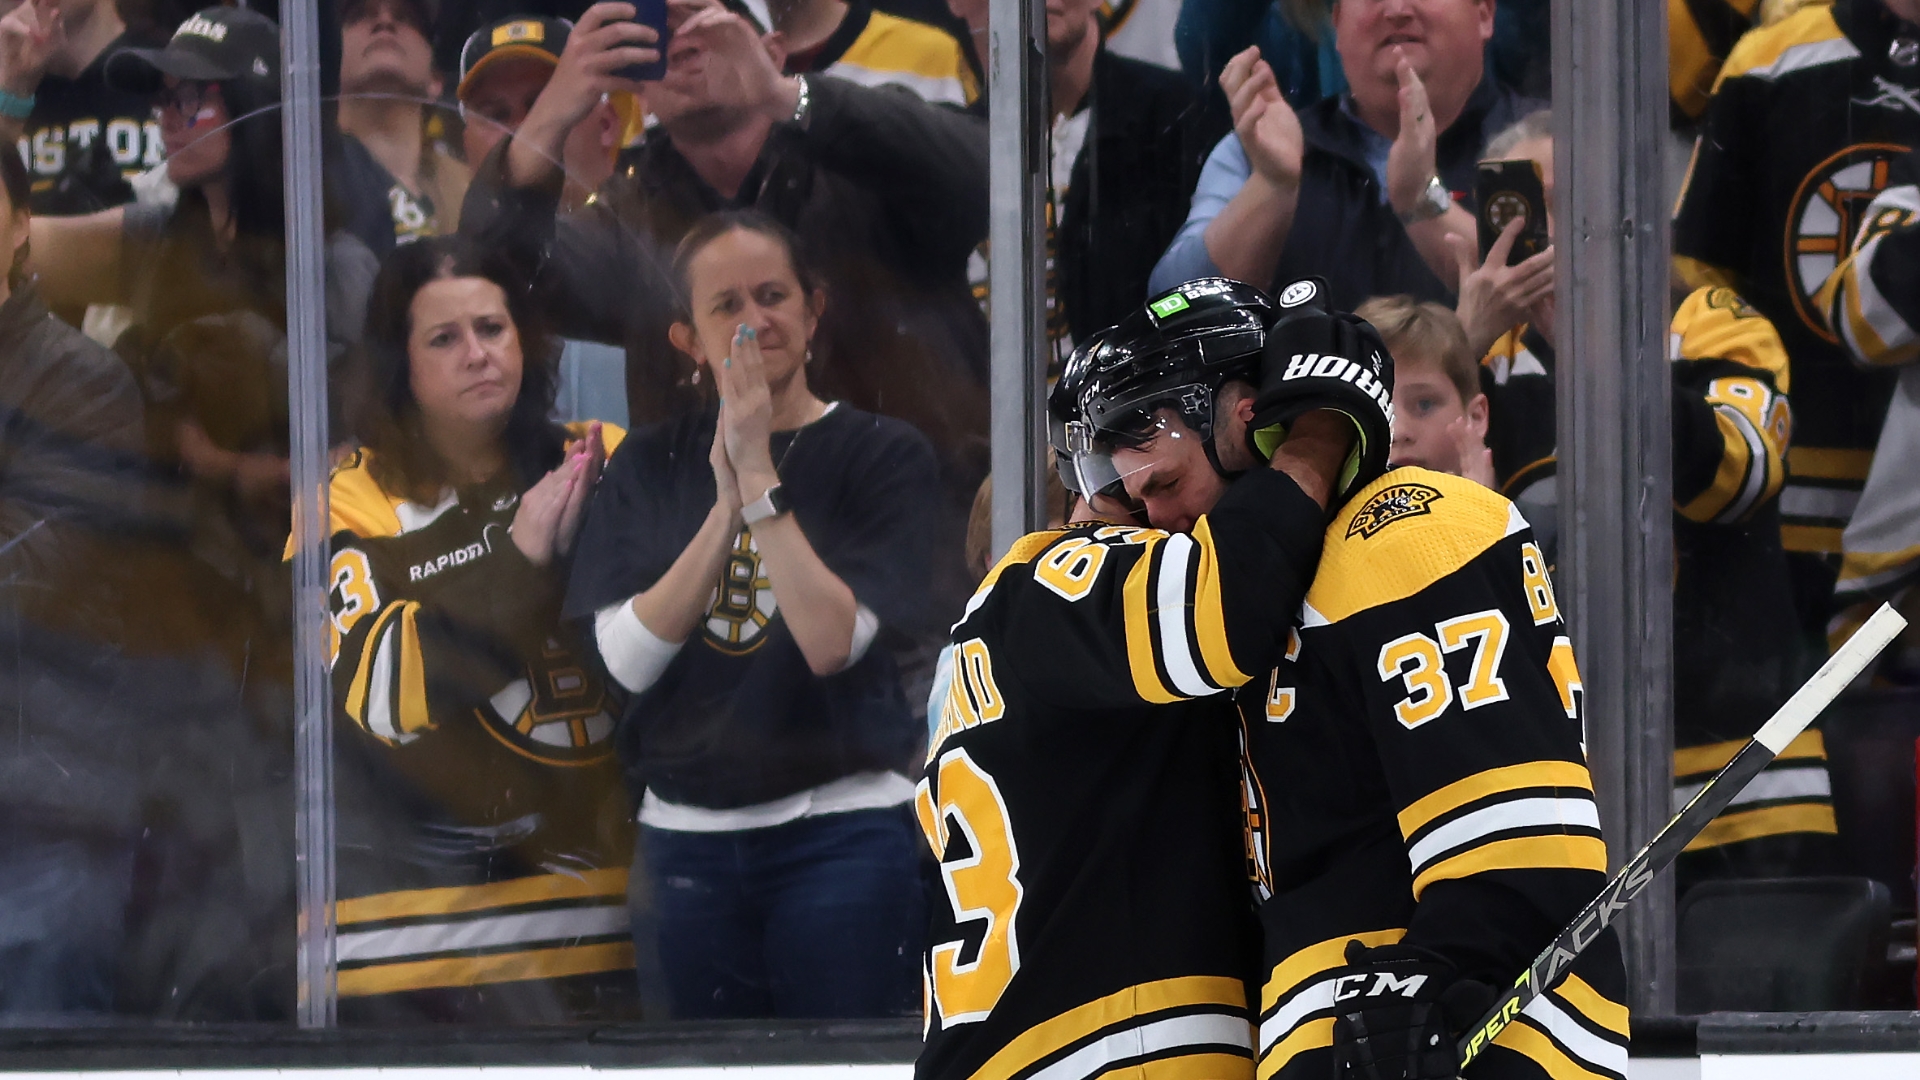 TD Garden Marks Twosday With Photo Bruins, Celtics Fans Will Love